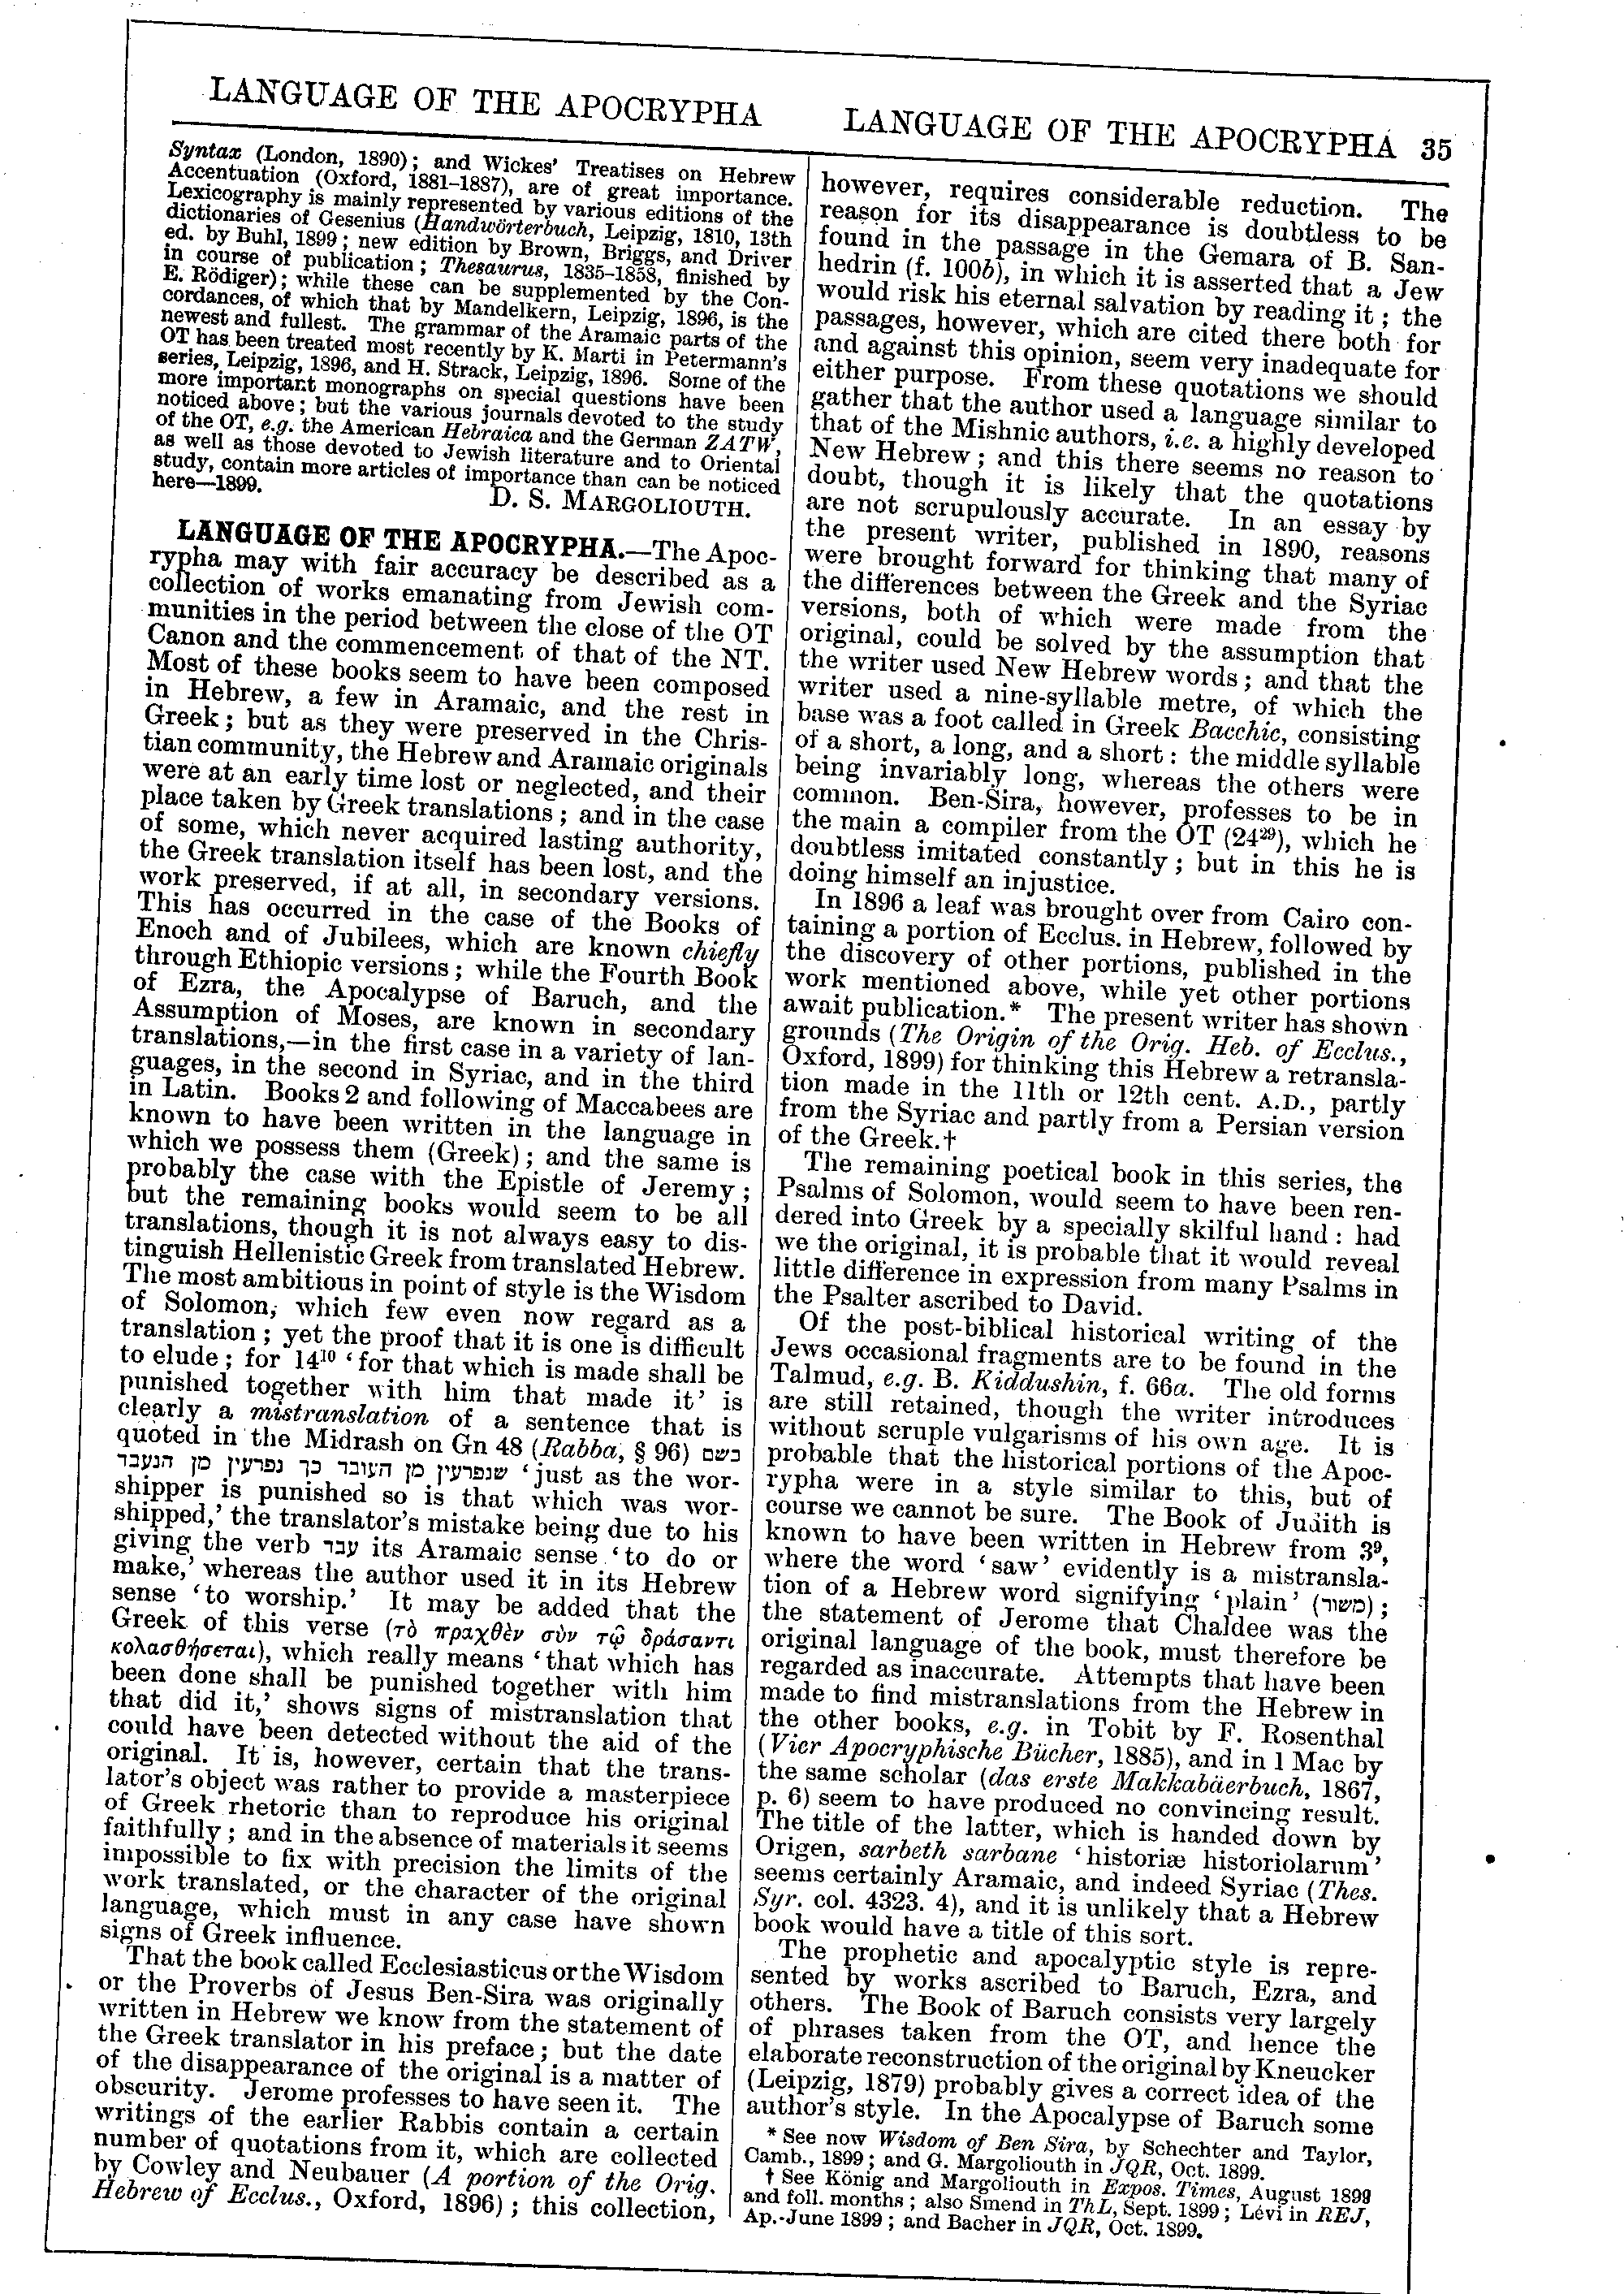 Image of page 35